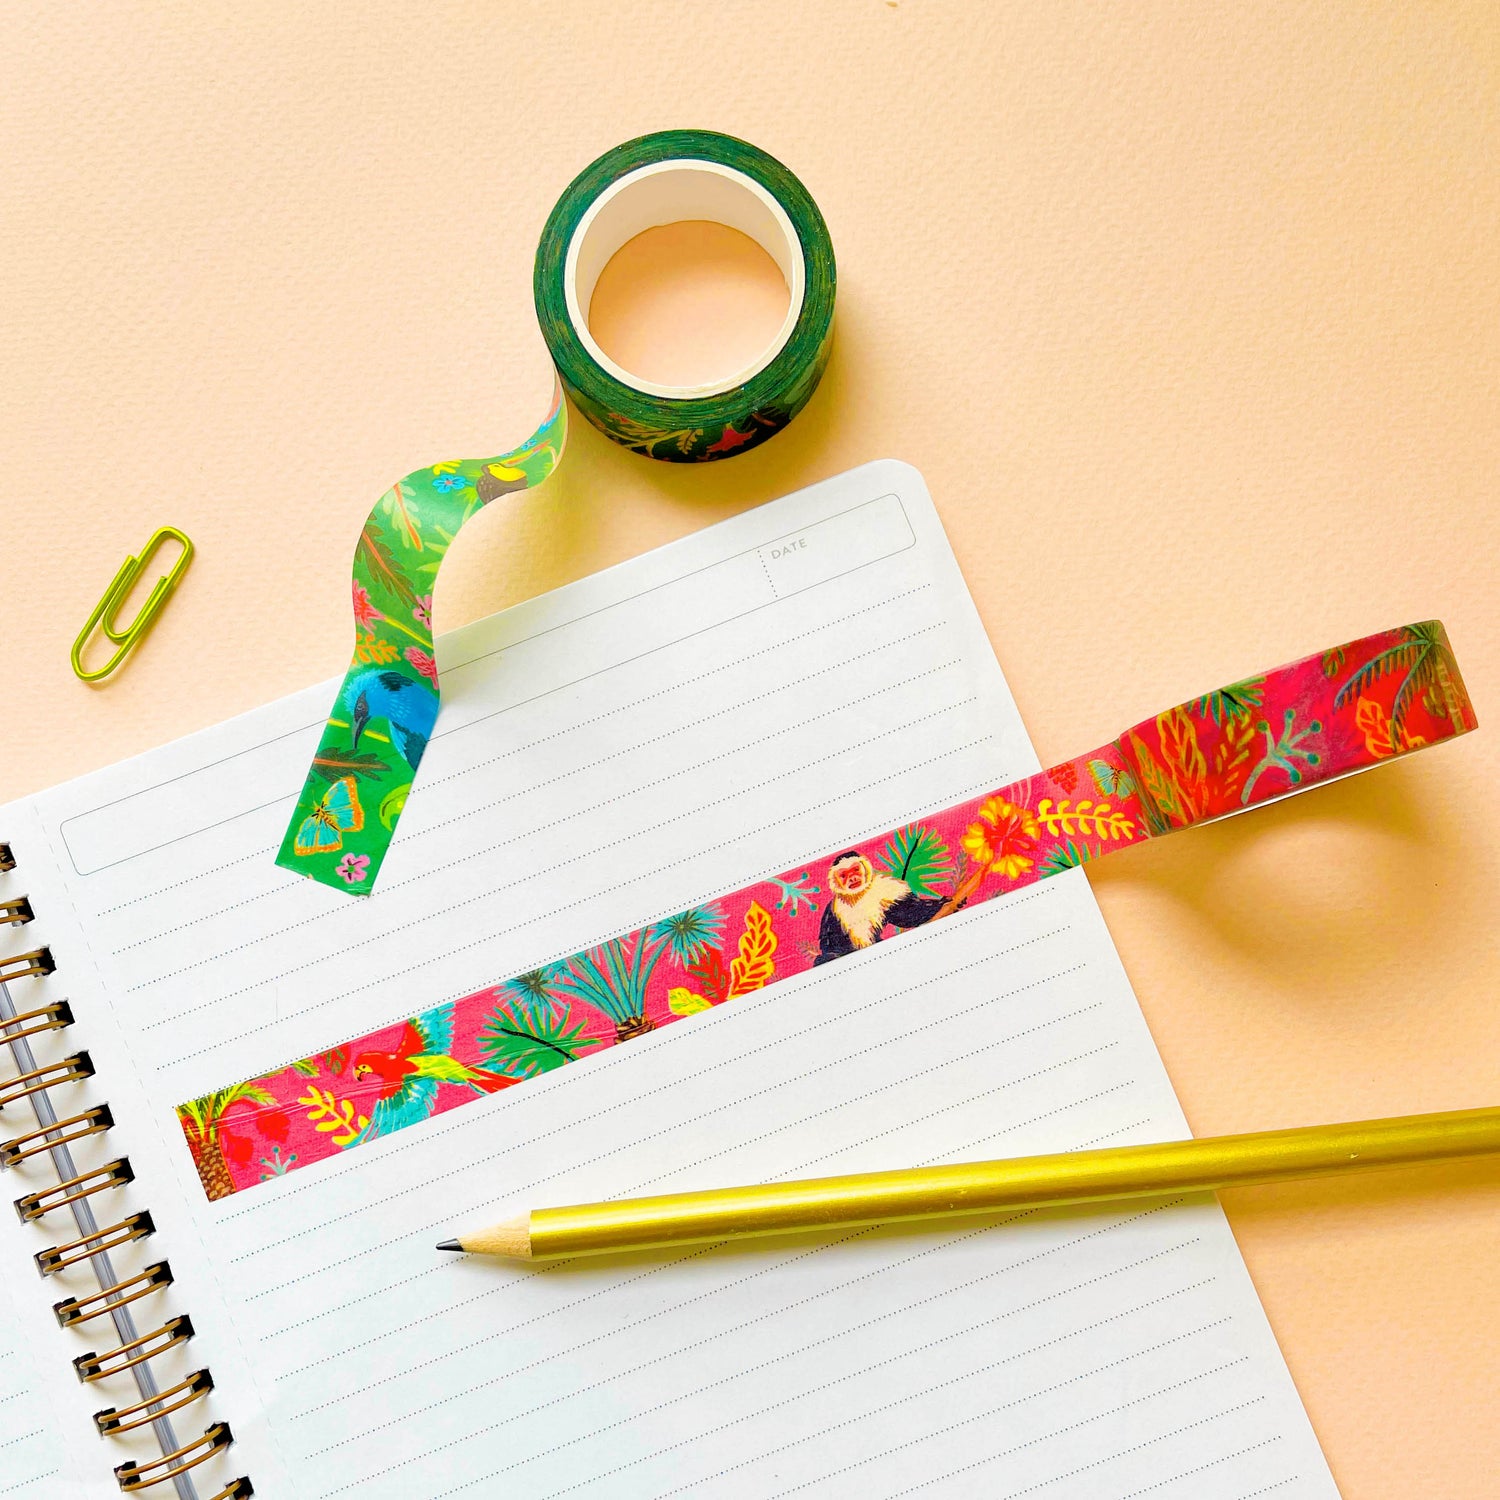 Tropical hibiscus washi tape with roll of green jungle washi tape